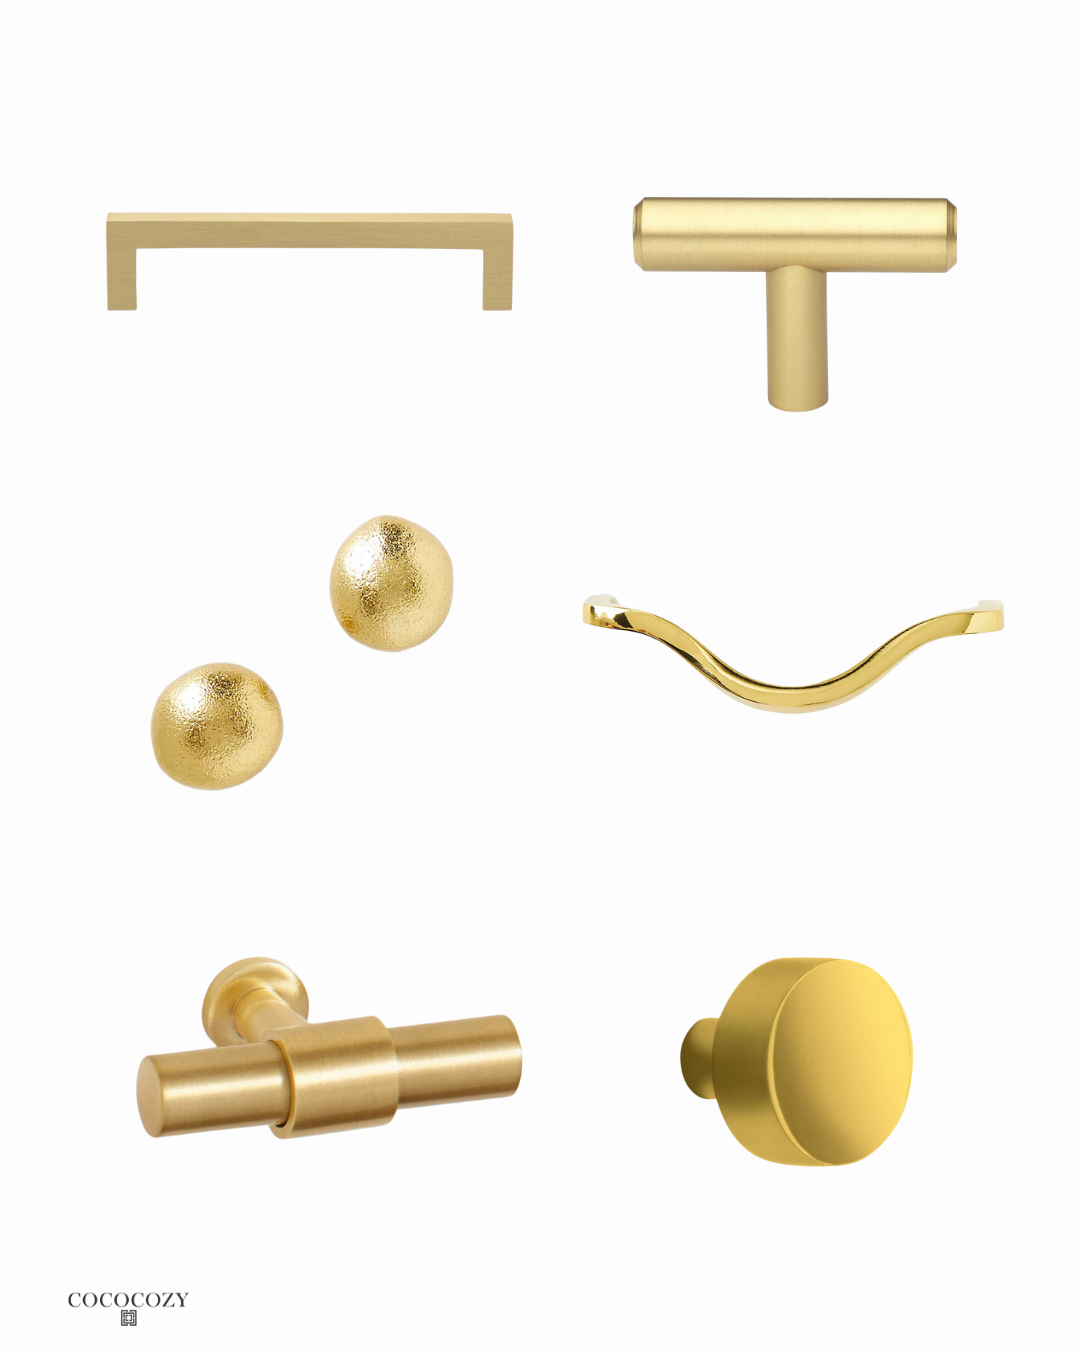 gold cabinet hardware kitchen cococozy